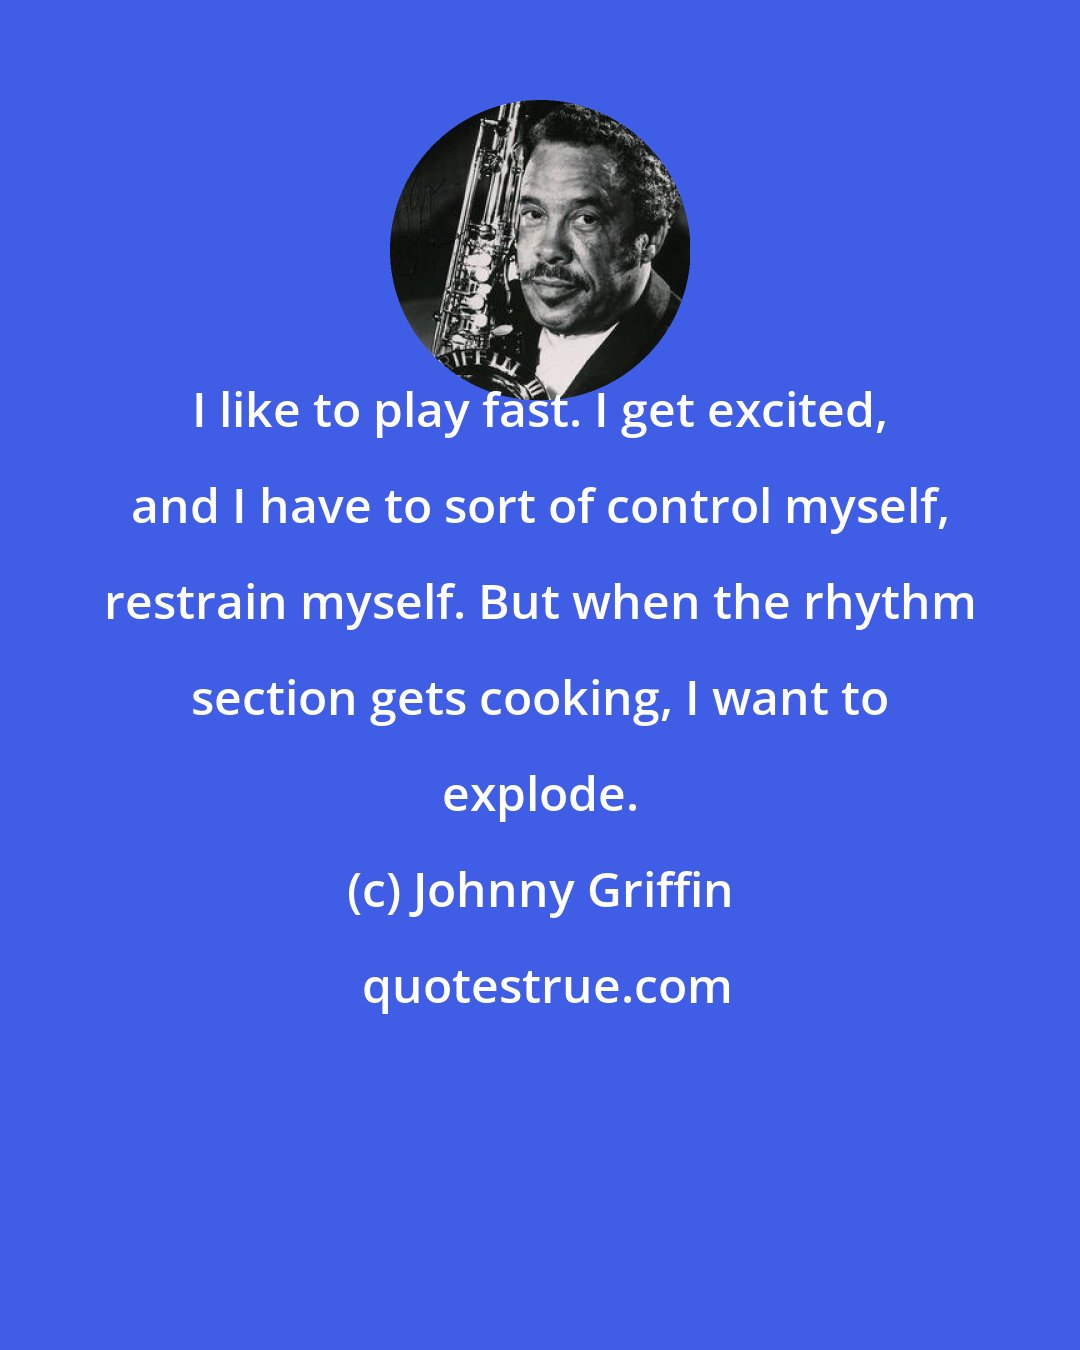 Johnny Griffin: I like to play fast. I get excited, and I have to sort of control myself, restrain myself. But when the rhythm section gets cooking, I want to explode.